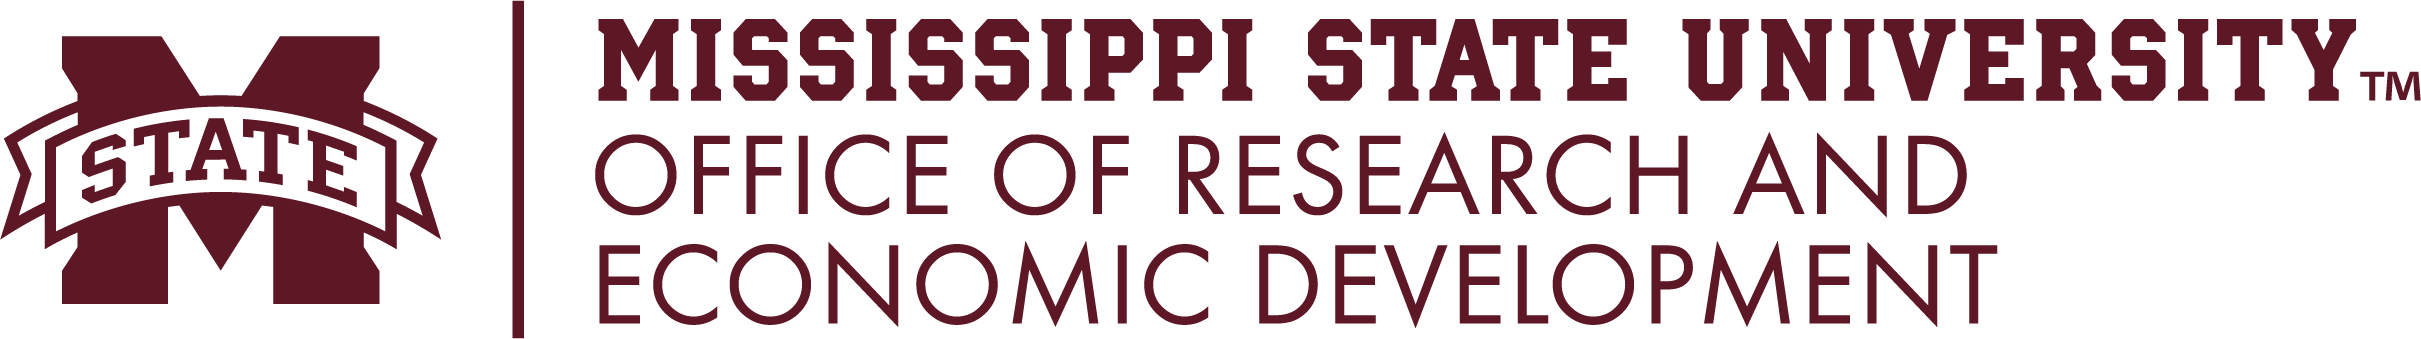 Mississippi State University Office of Research and Economic Development logo